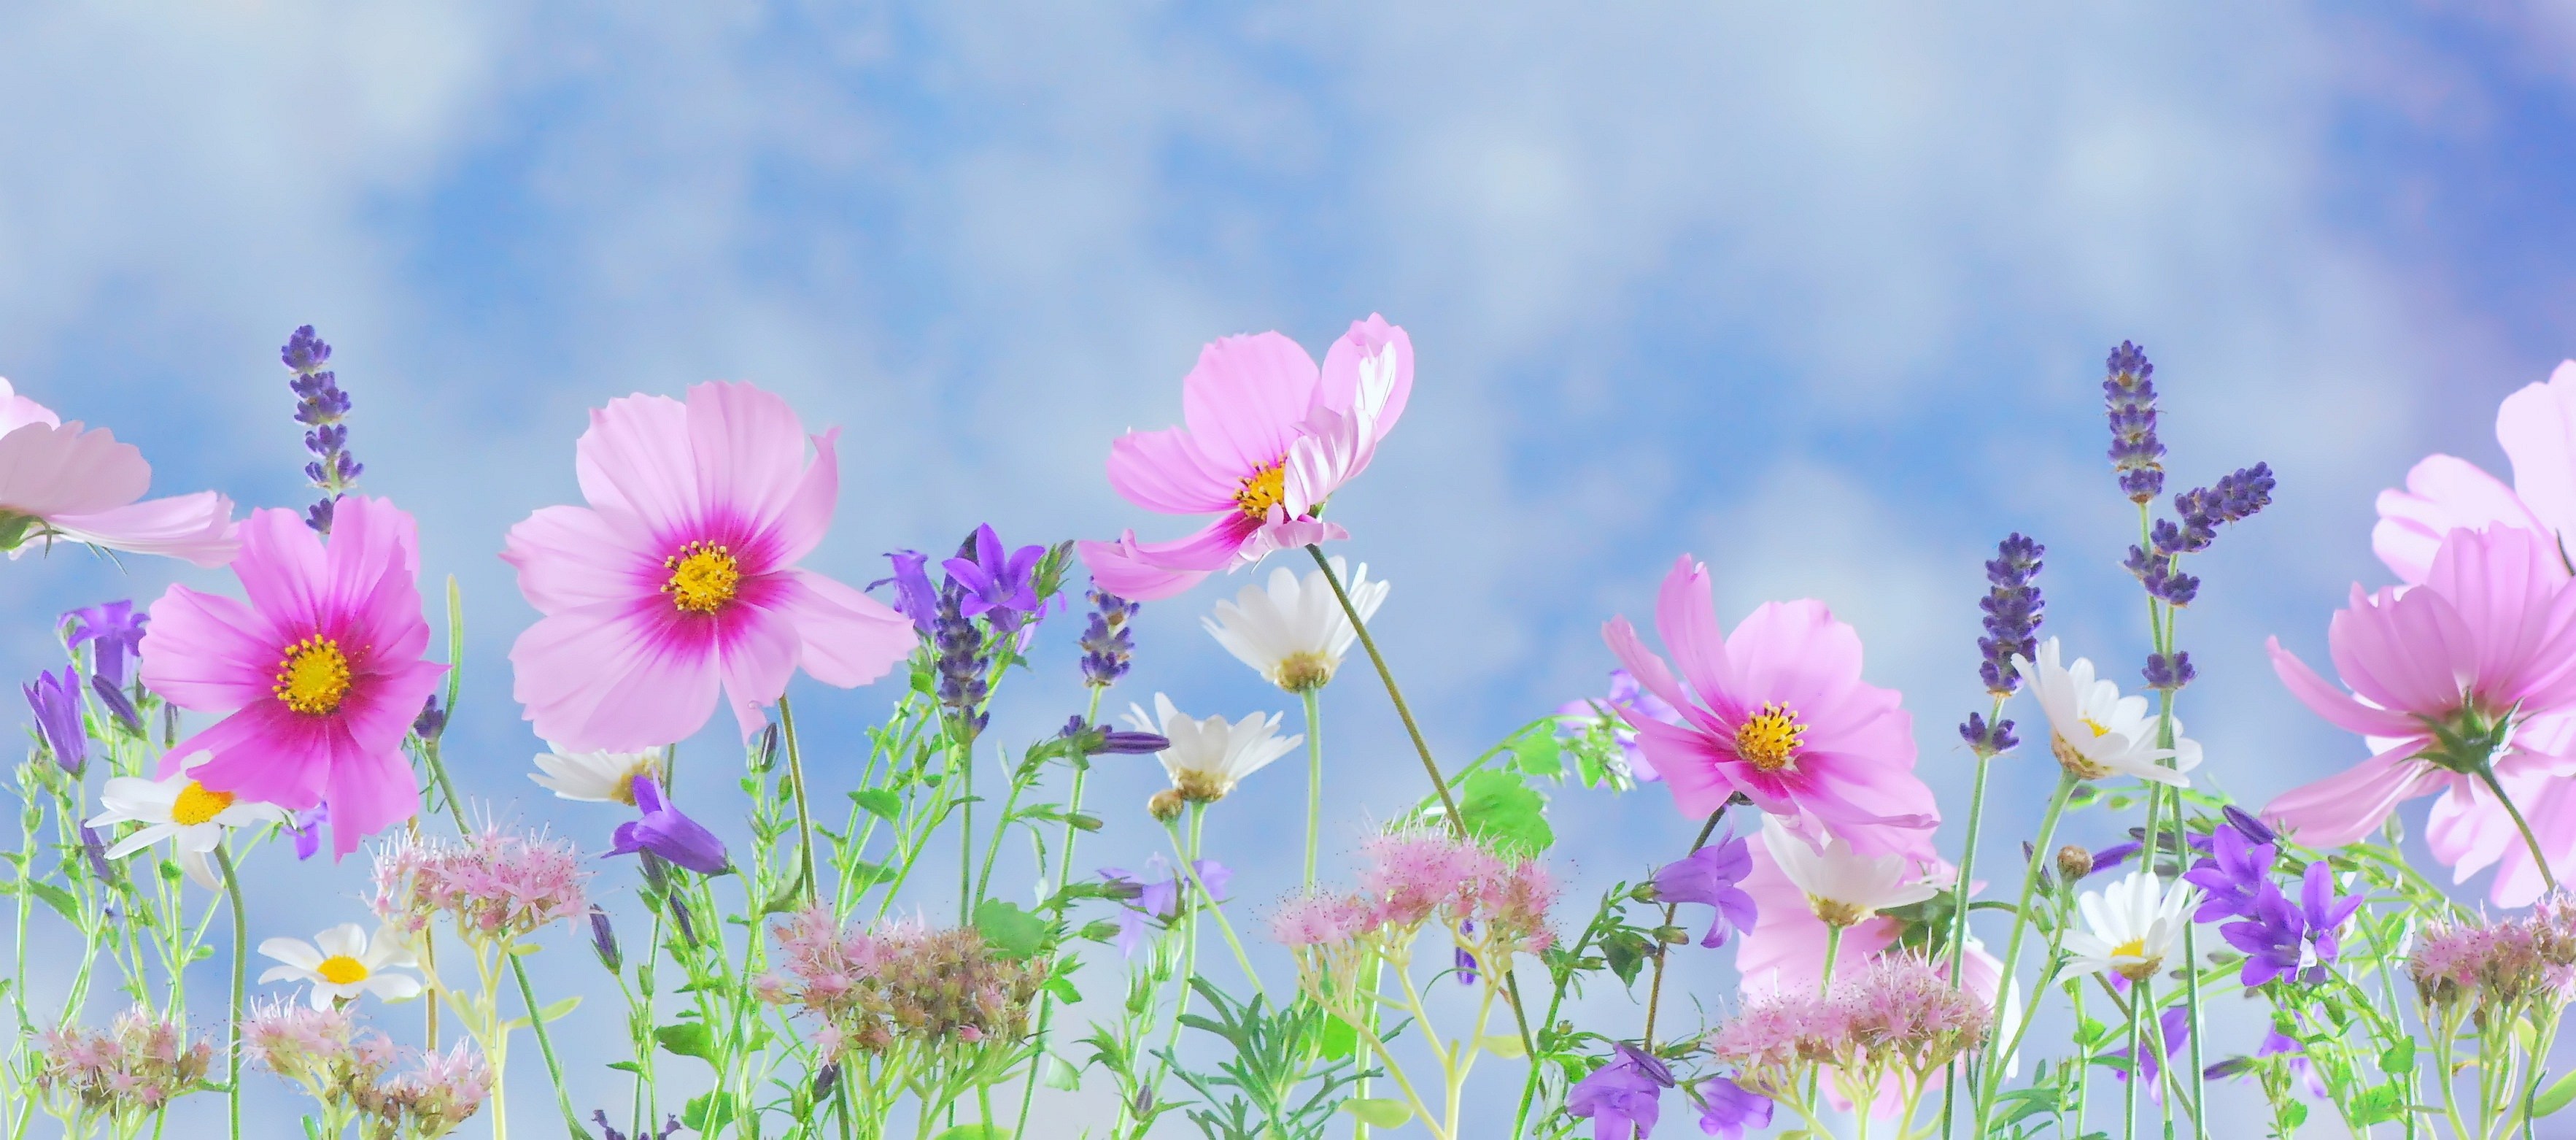 HD desktop wallpaper: Flowers, Flower, Earth, Colors, Colorful, Spring,  Cosmos download free picture #442385